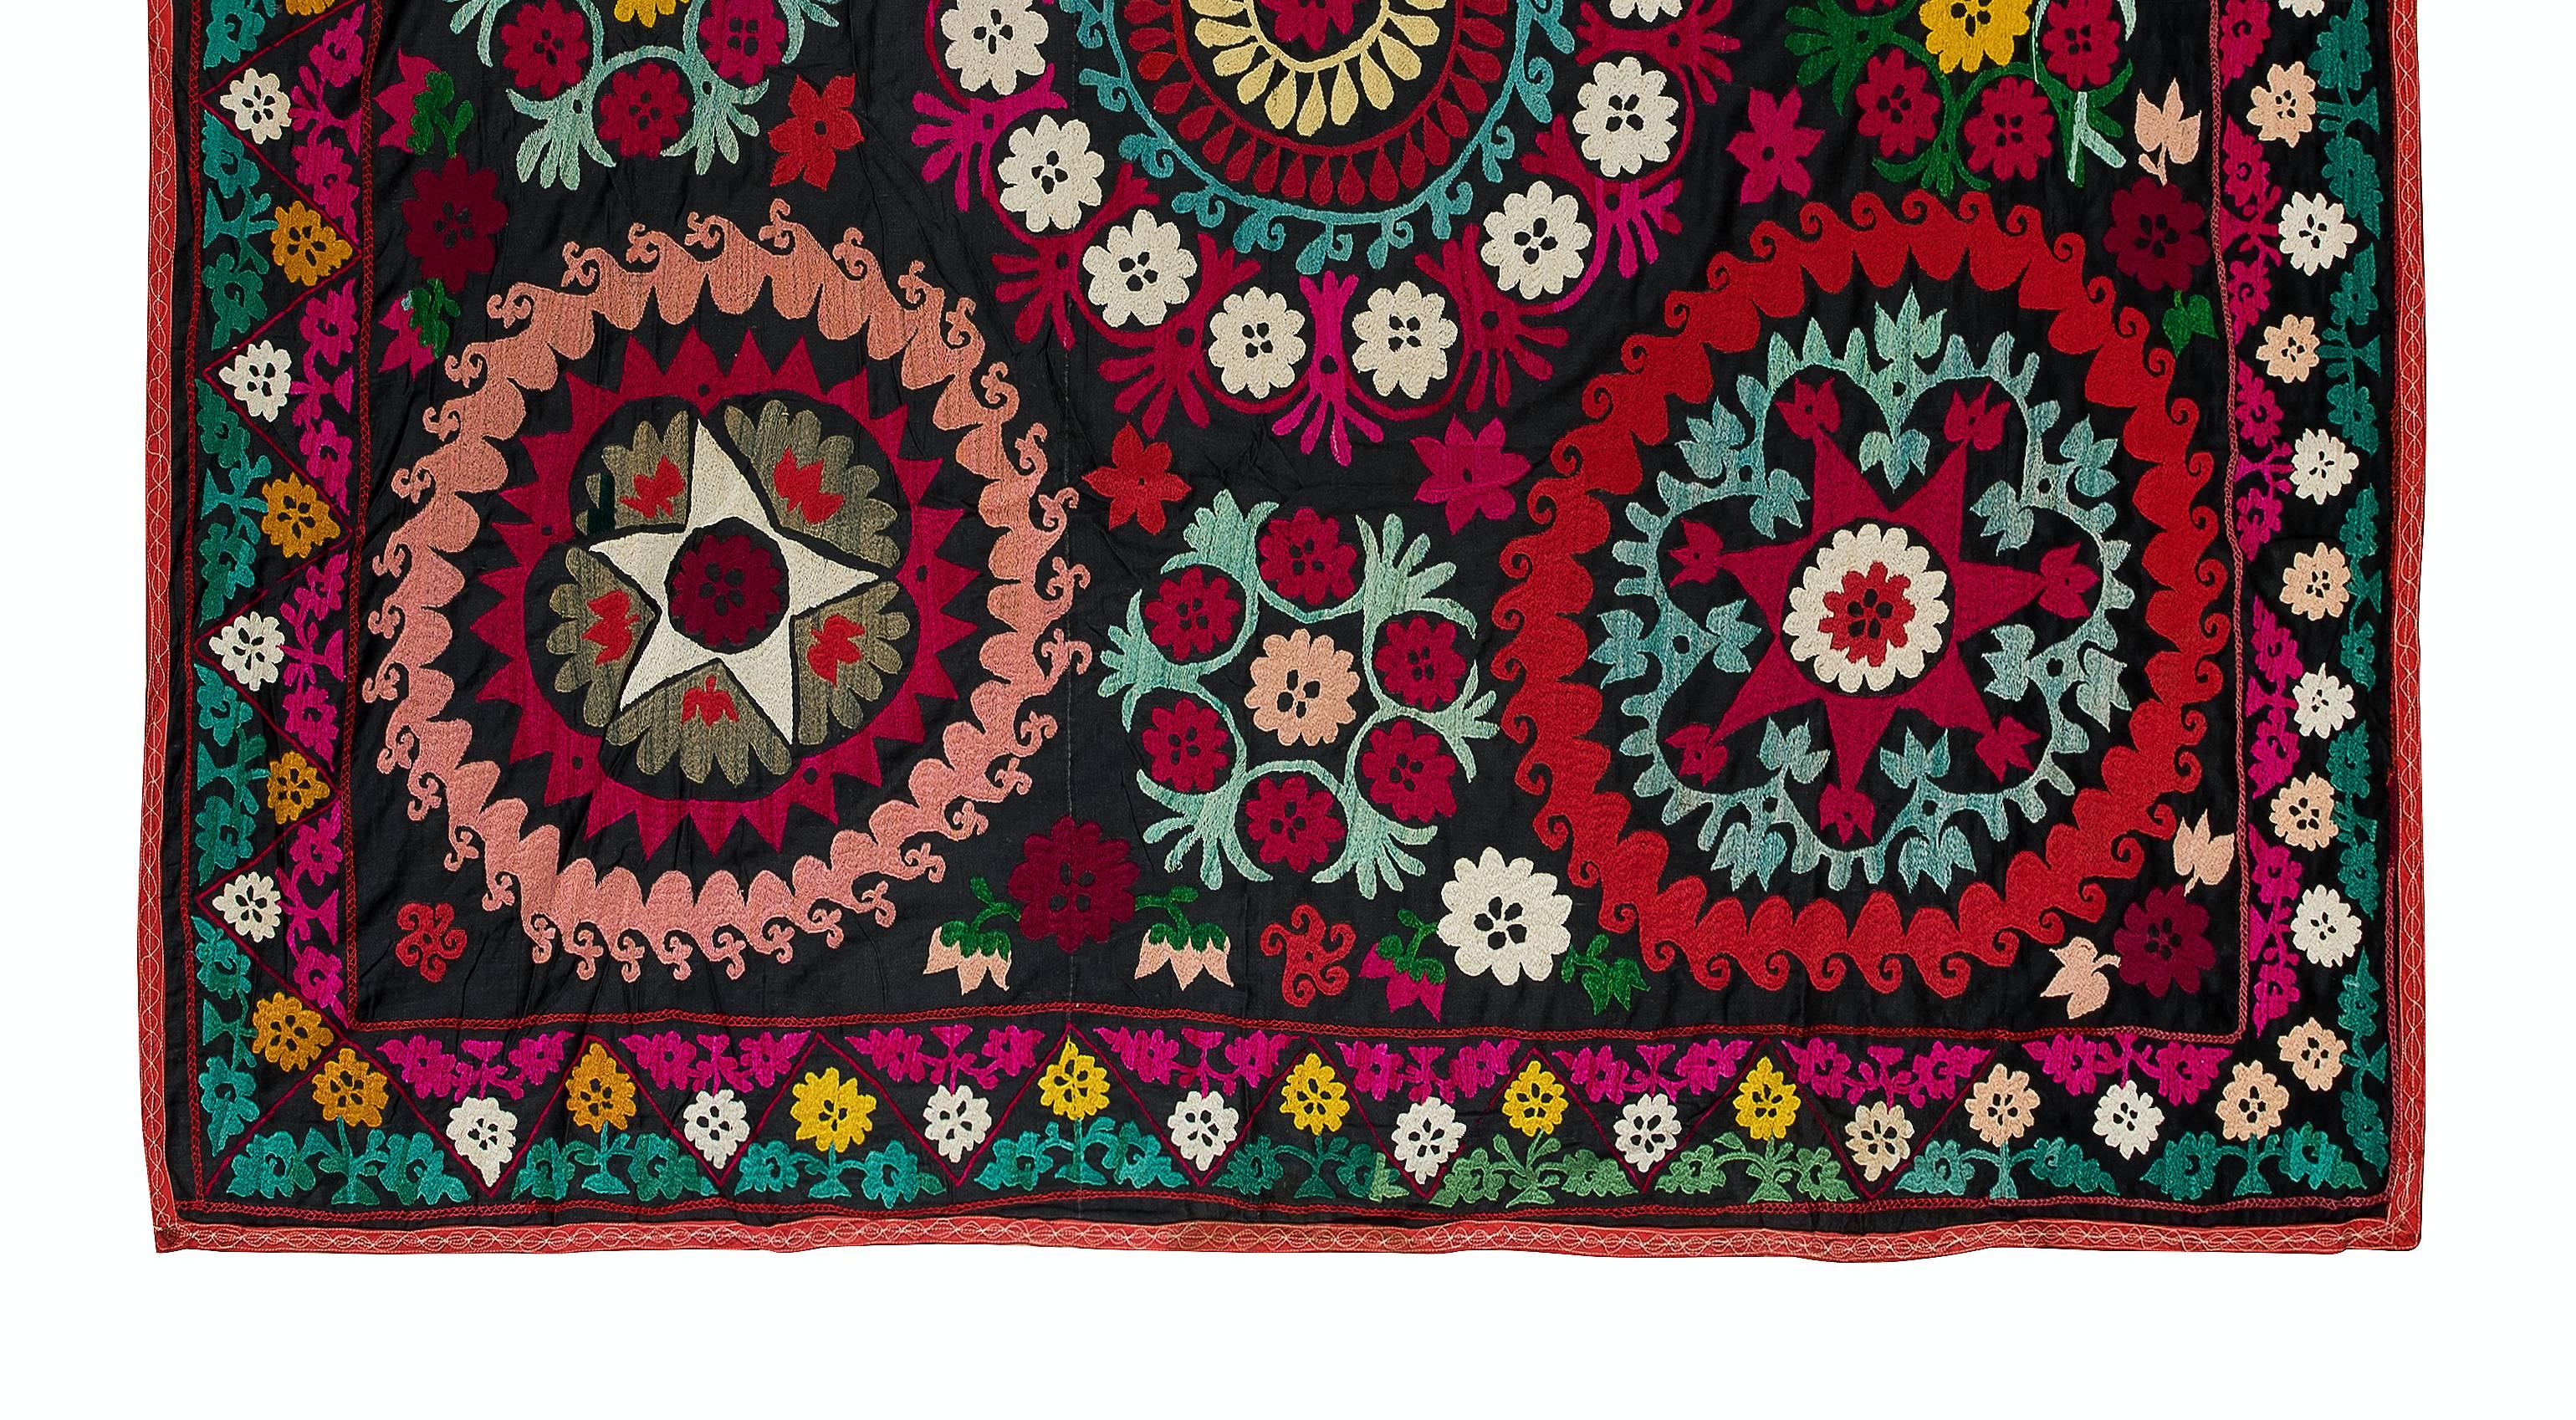 Uzbek 6x6 Ft Vintage Silk Hand Embroidery Bed Cover, Square Asian Suzani Wall Hanging For Sale